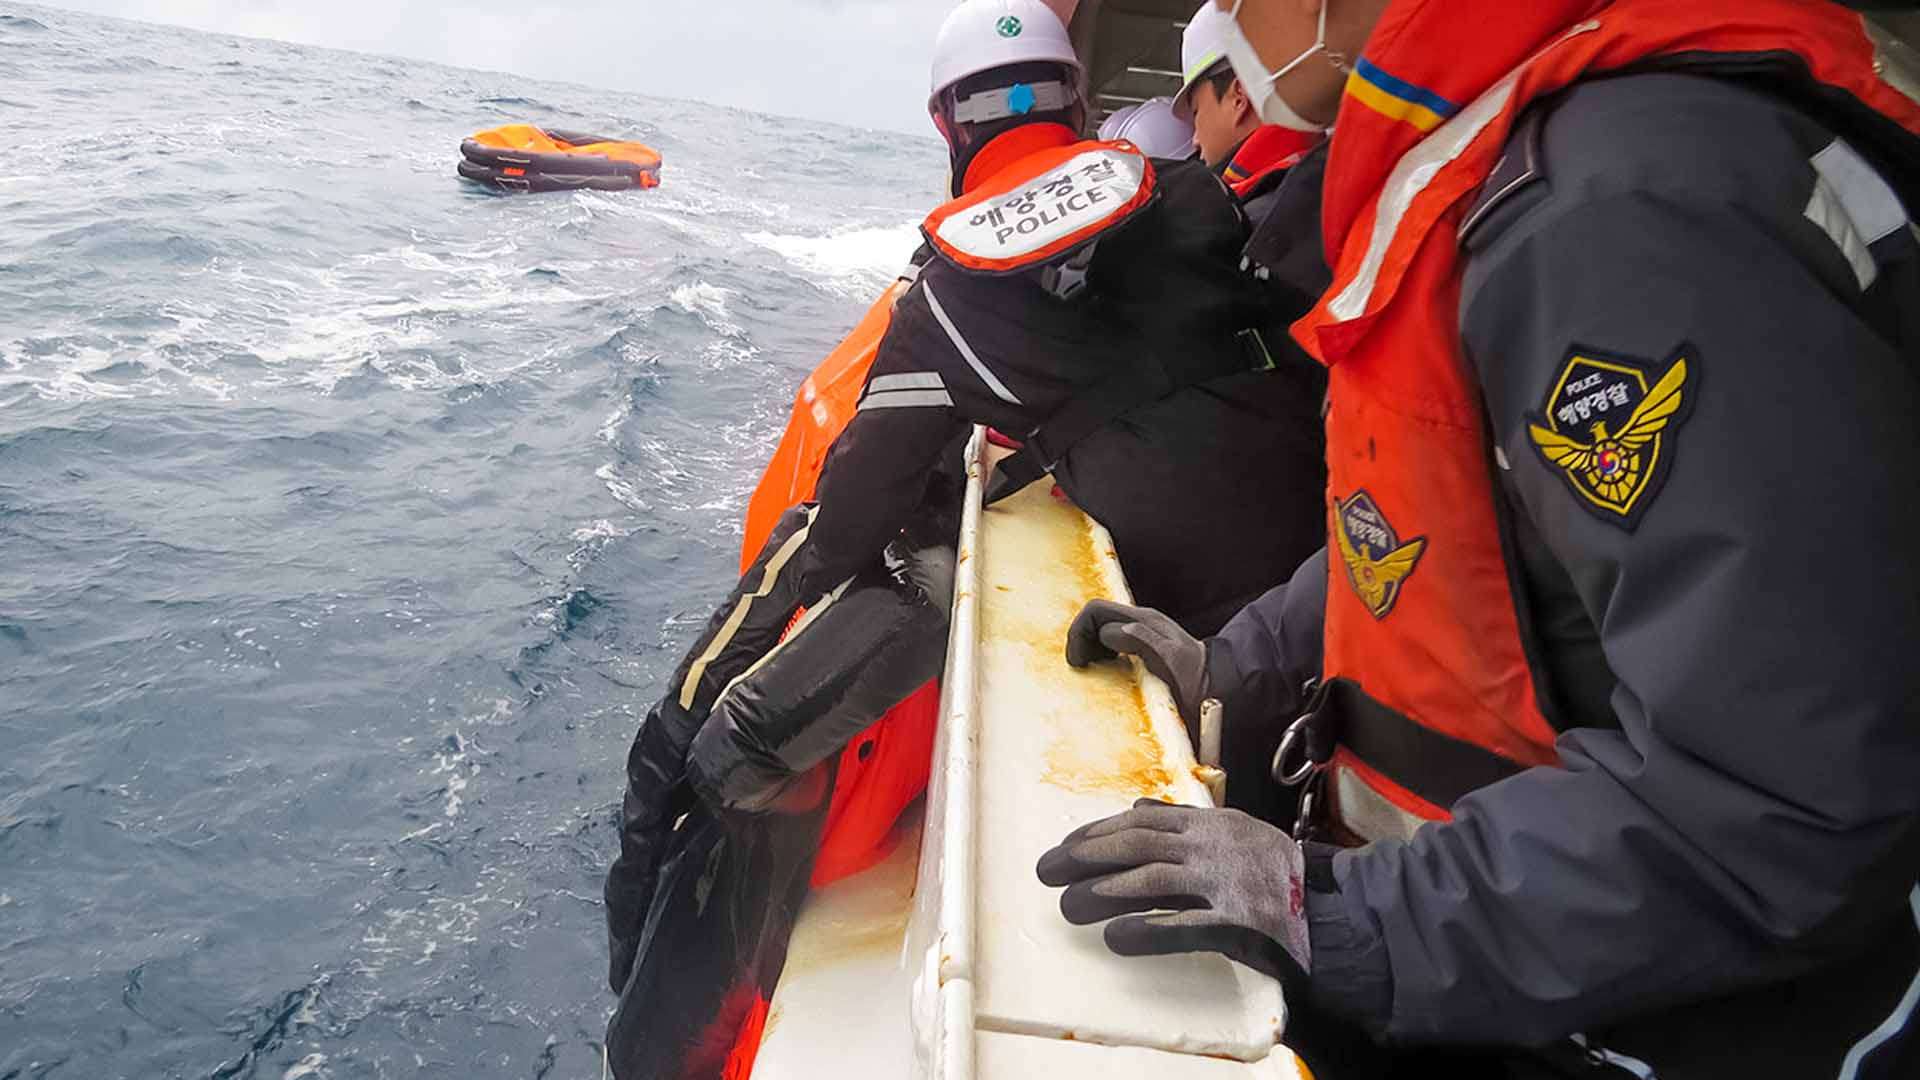 Ship carrying 22 sinks off Jeju, 14 rescued, 9 unconscious